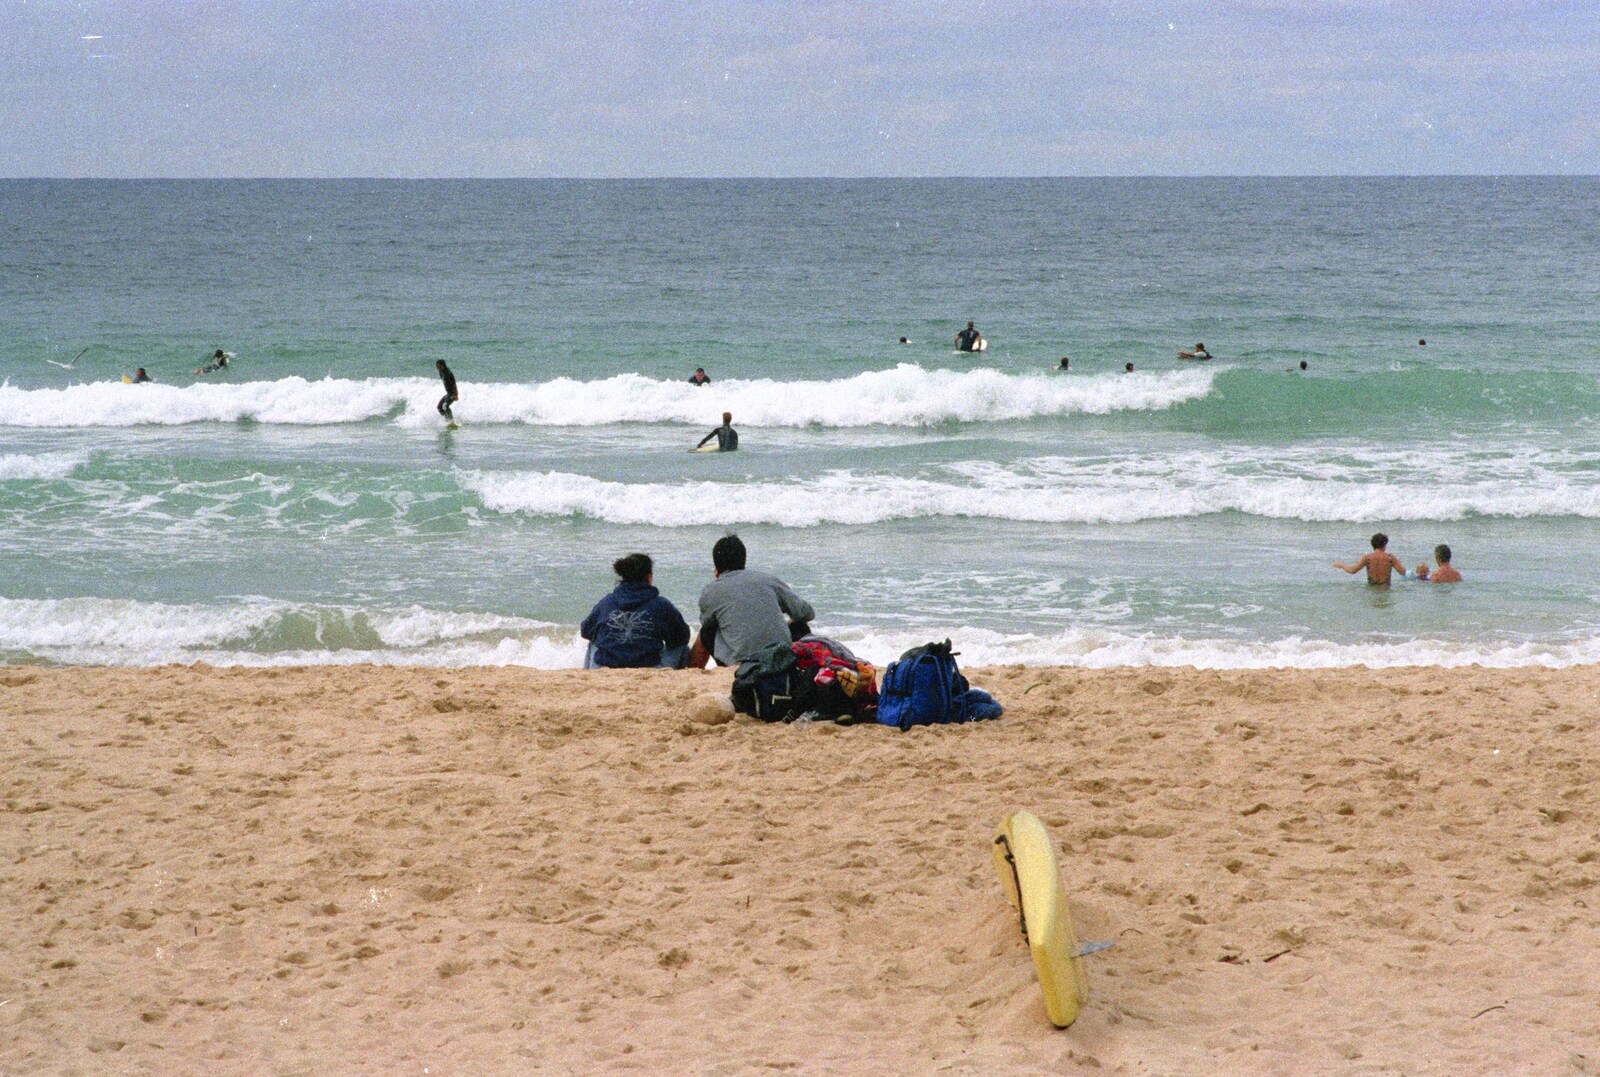 The beach at Manly from A Trip to the Zoo, Sydney, Australia - 7th April 2000